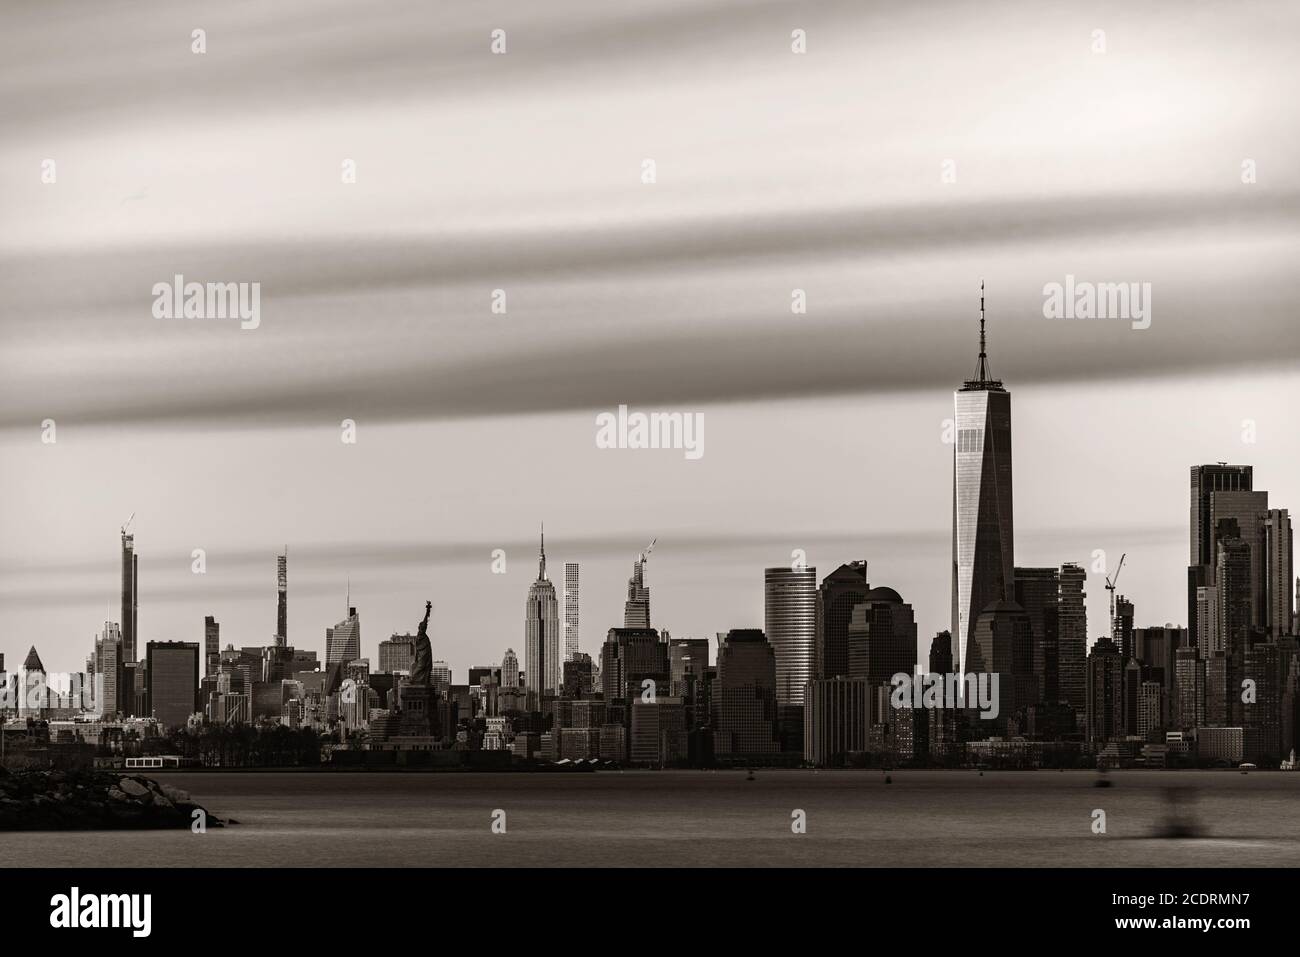 New York City downtown skyline with architecture Stock Photo